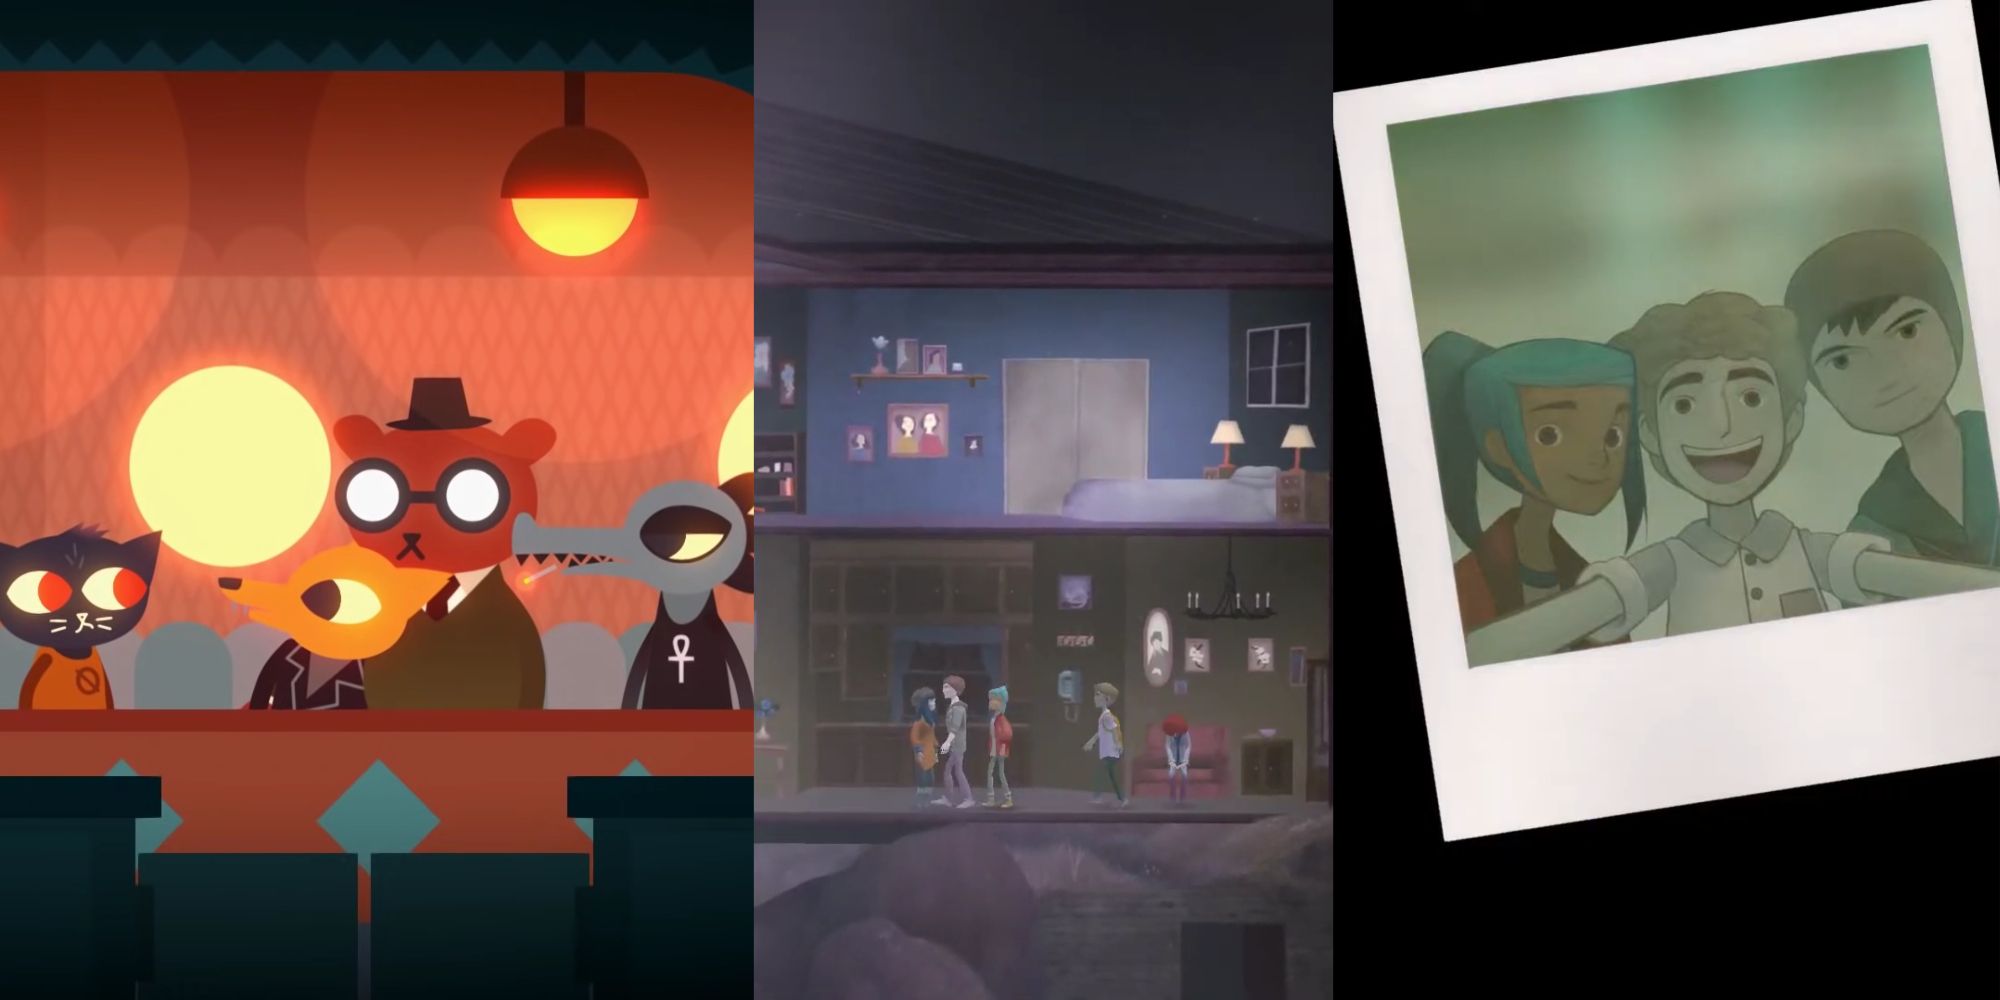 Split images of Mae and her friends in Night in the Woods and Alex and her friends in Oxenfree, including a selfie close-up photo of their faces.